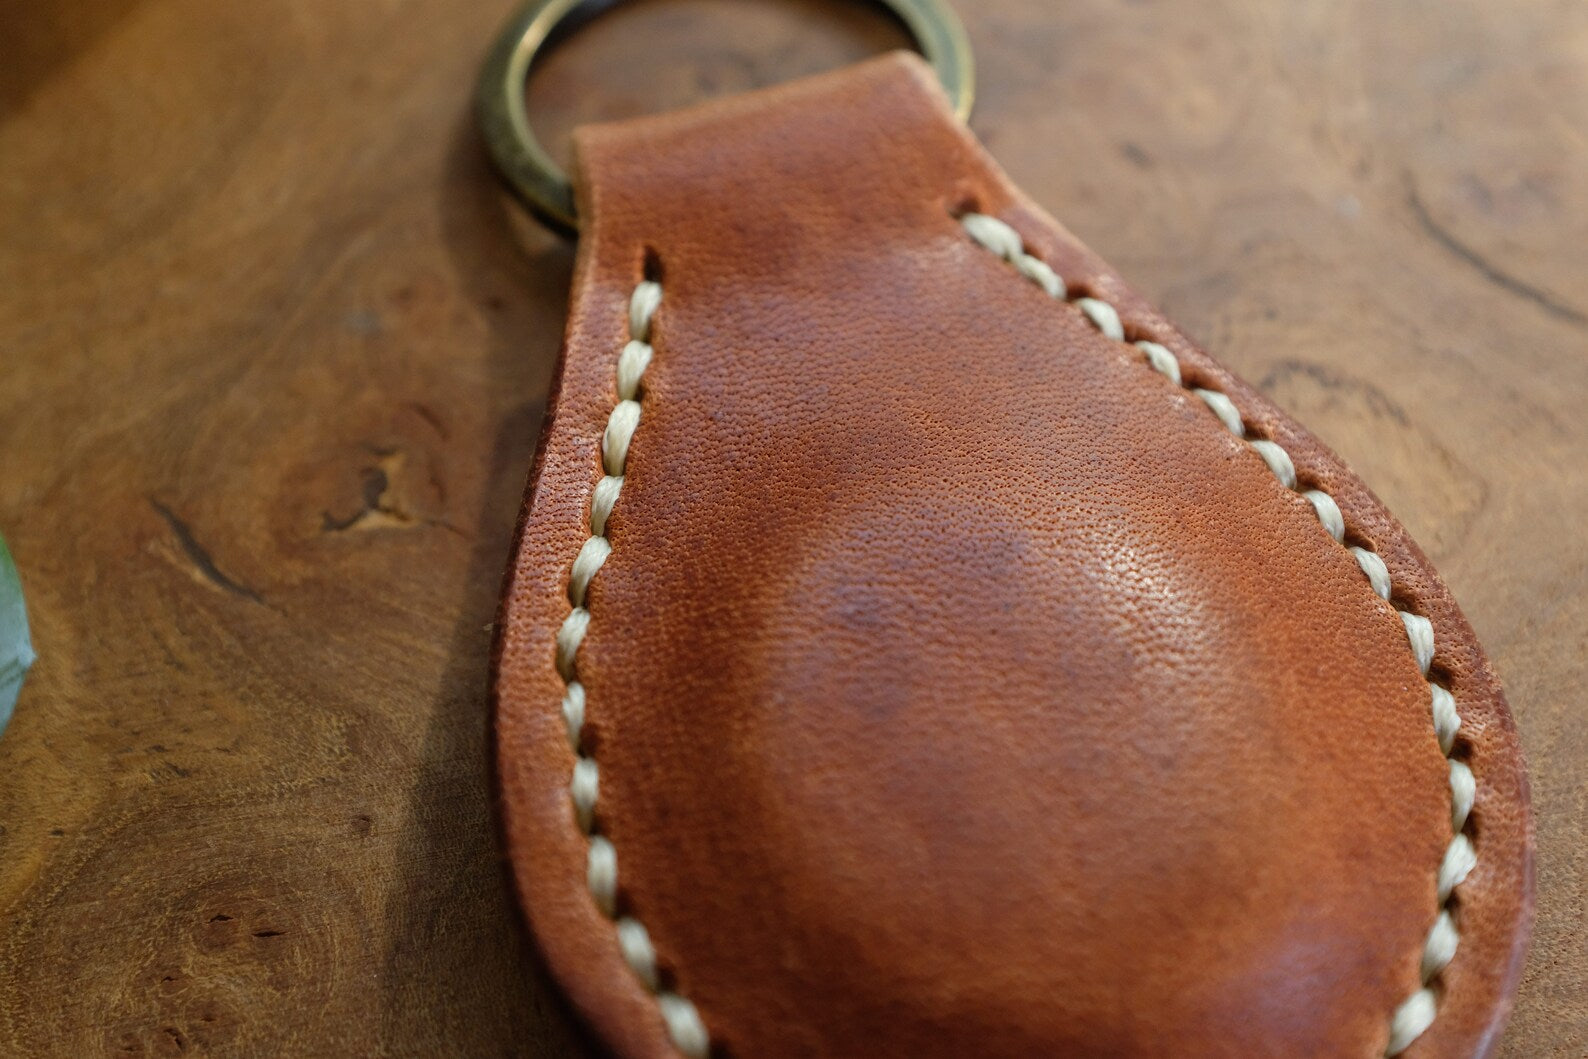 Padded Horween Leather Key Fob with Stitched Detail